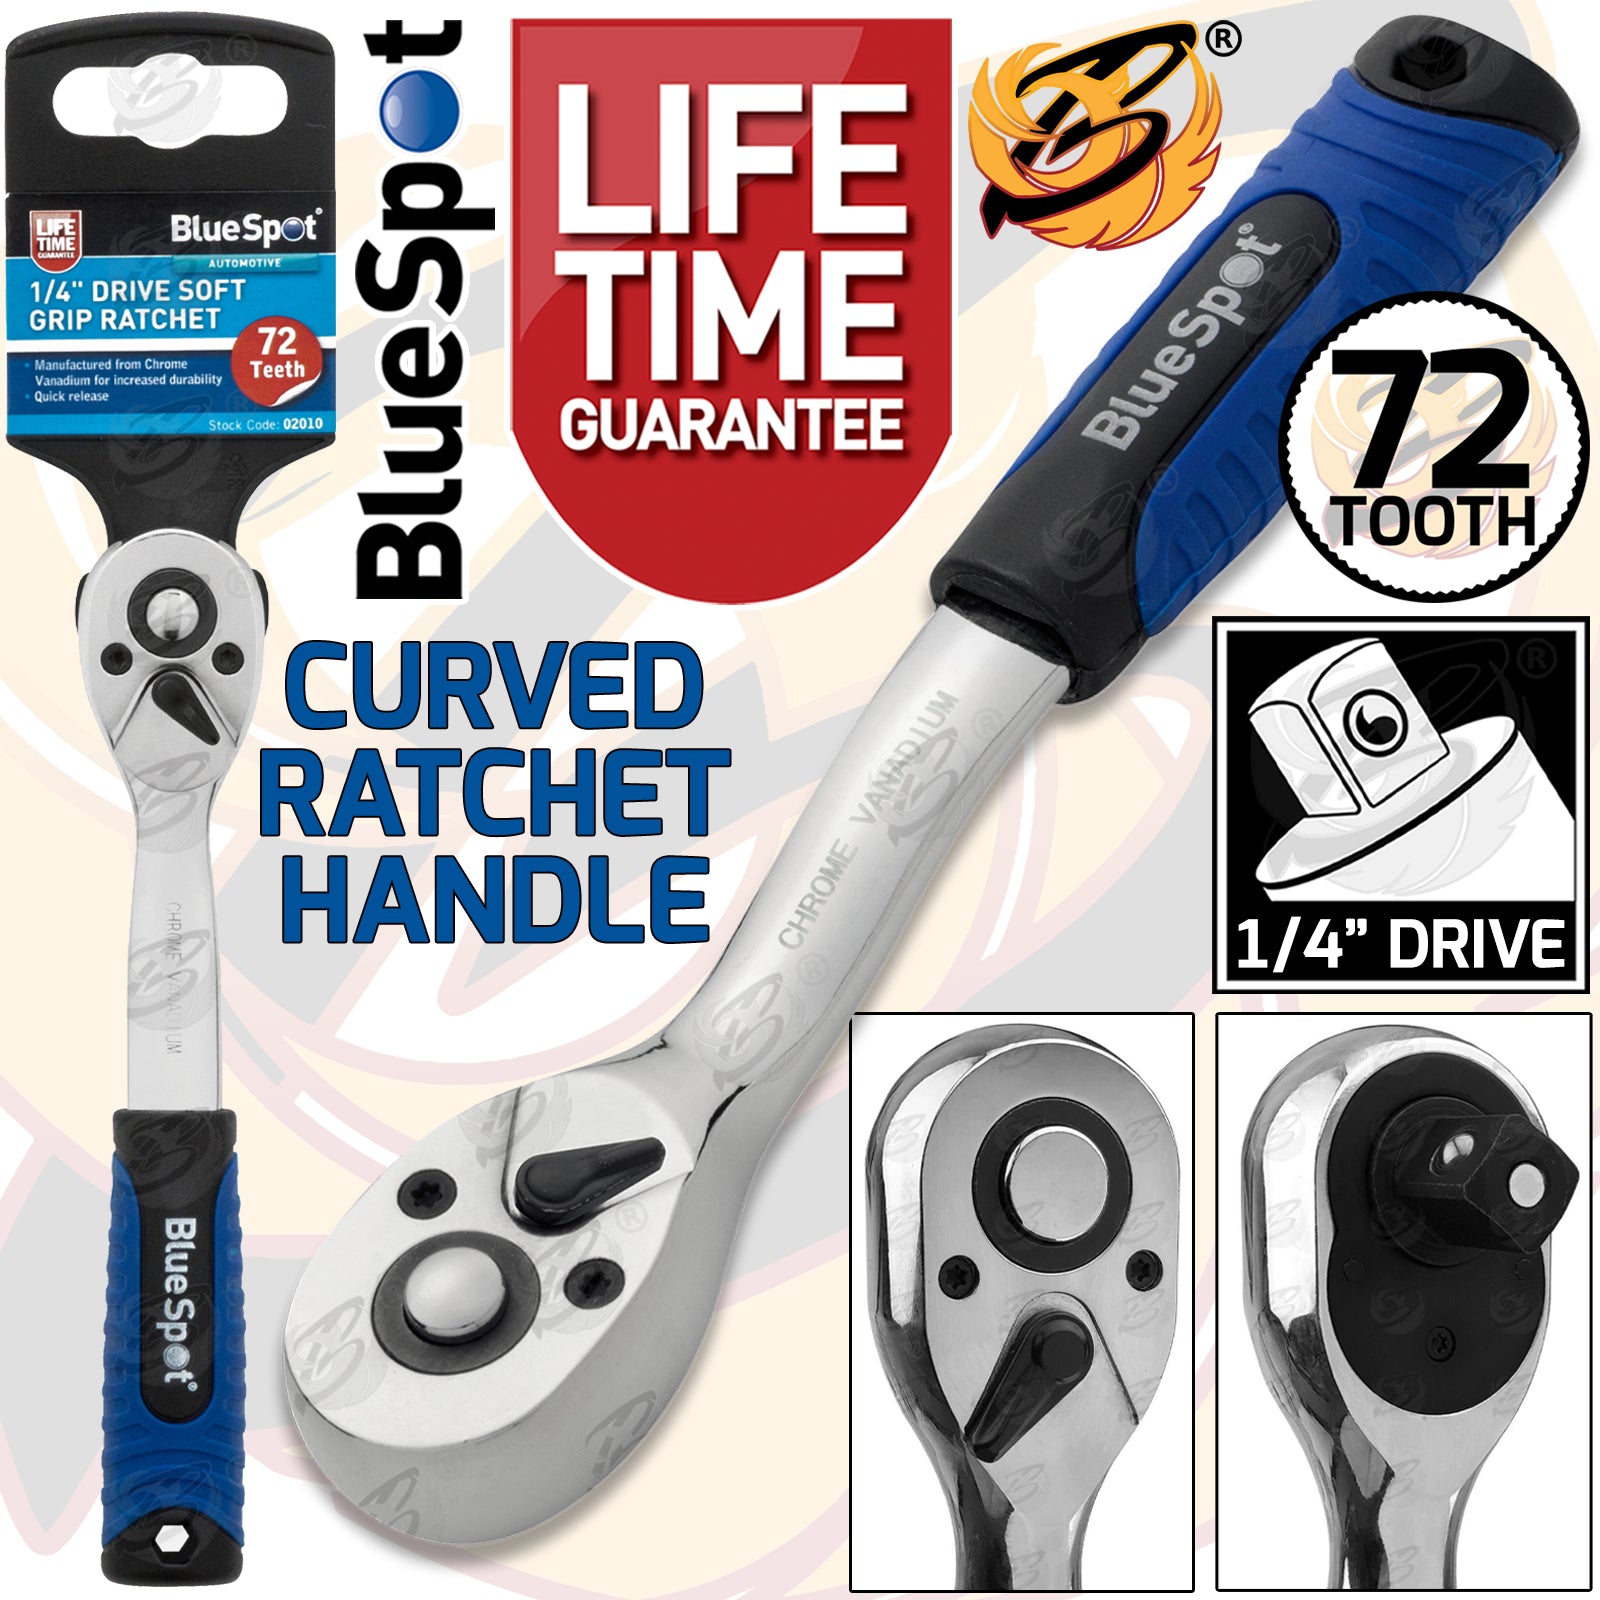 BLUESPOT 1/4" DRIVE 72 TOOTH SOFT GRIP CURVED RATCHET HANDLE